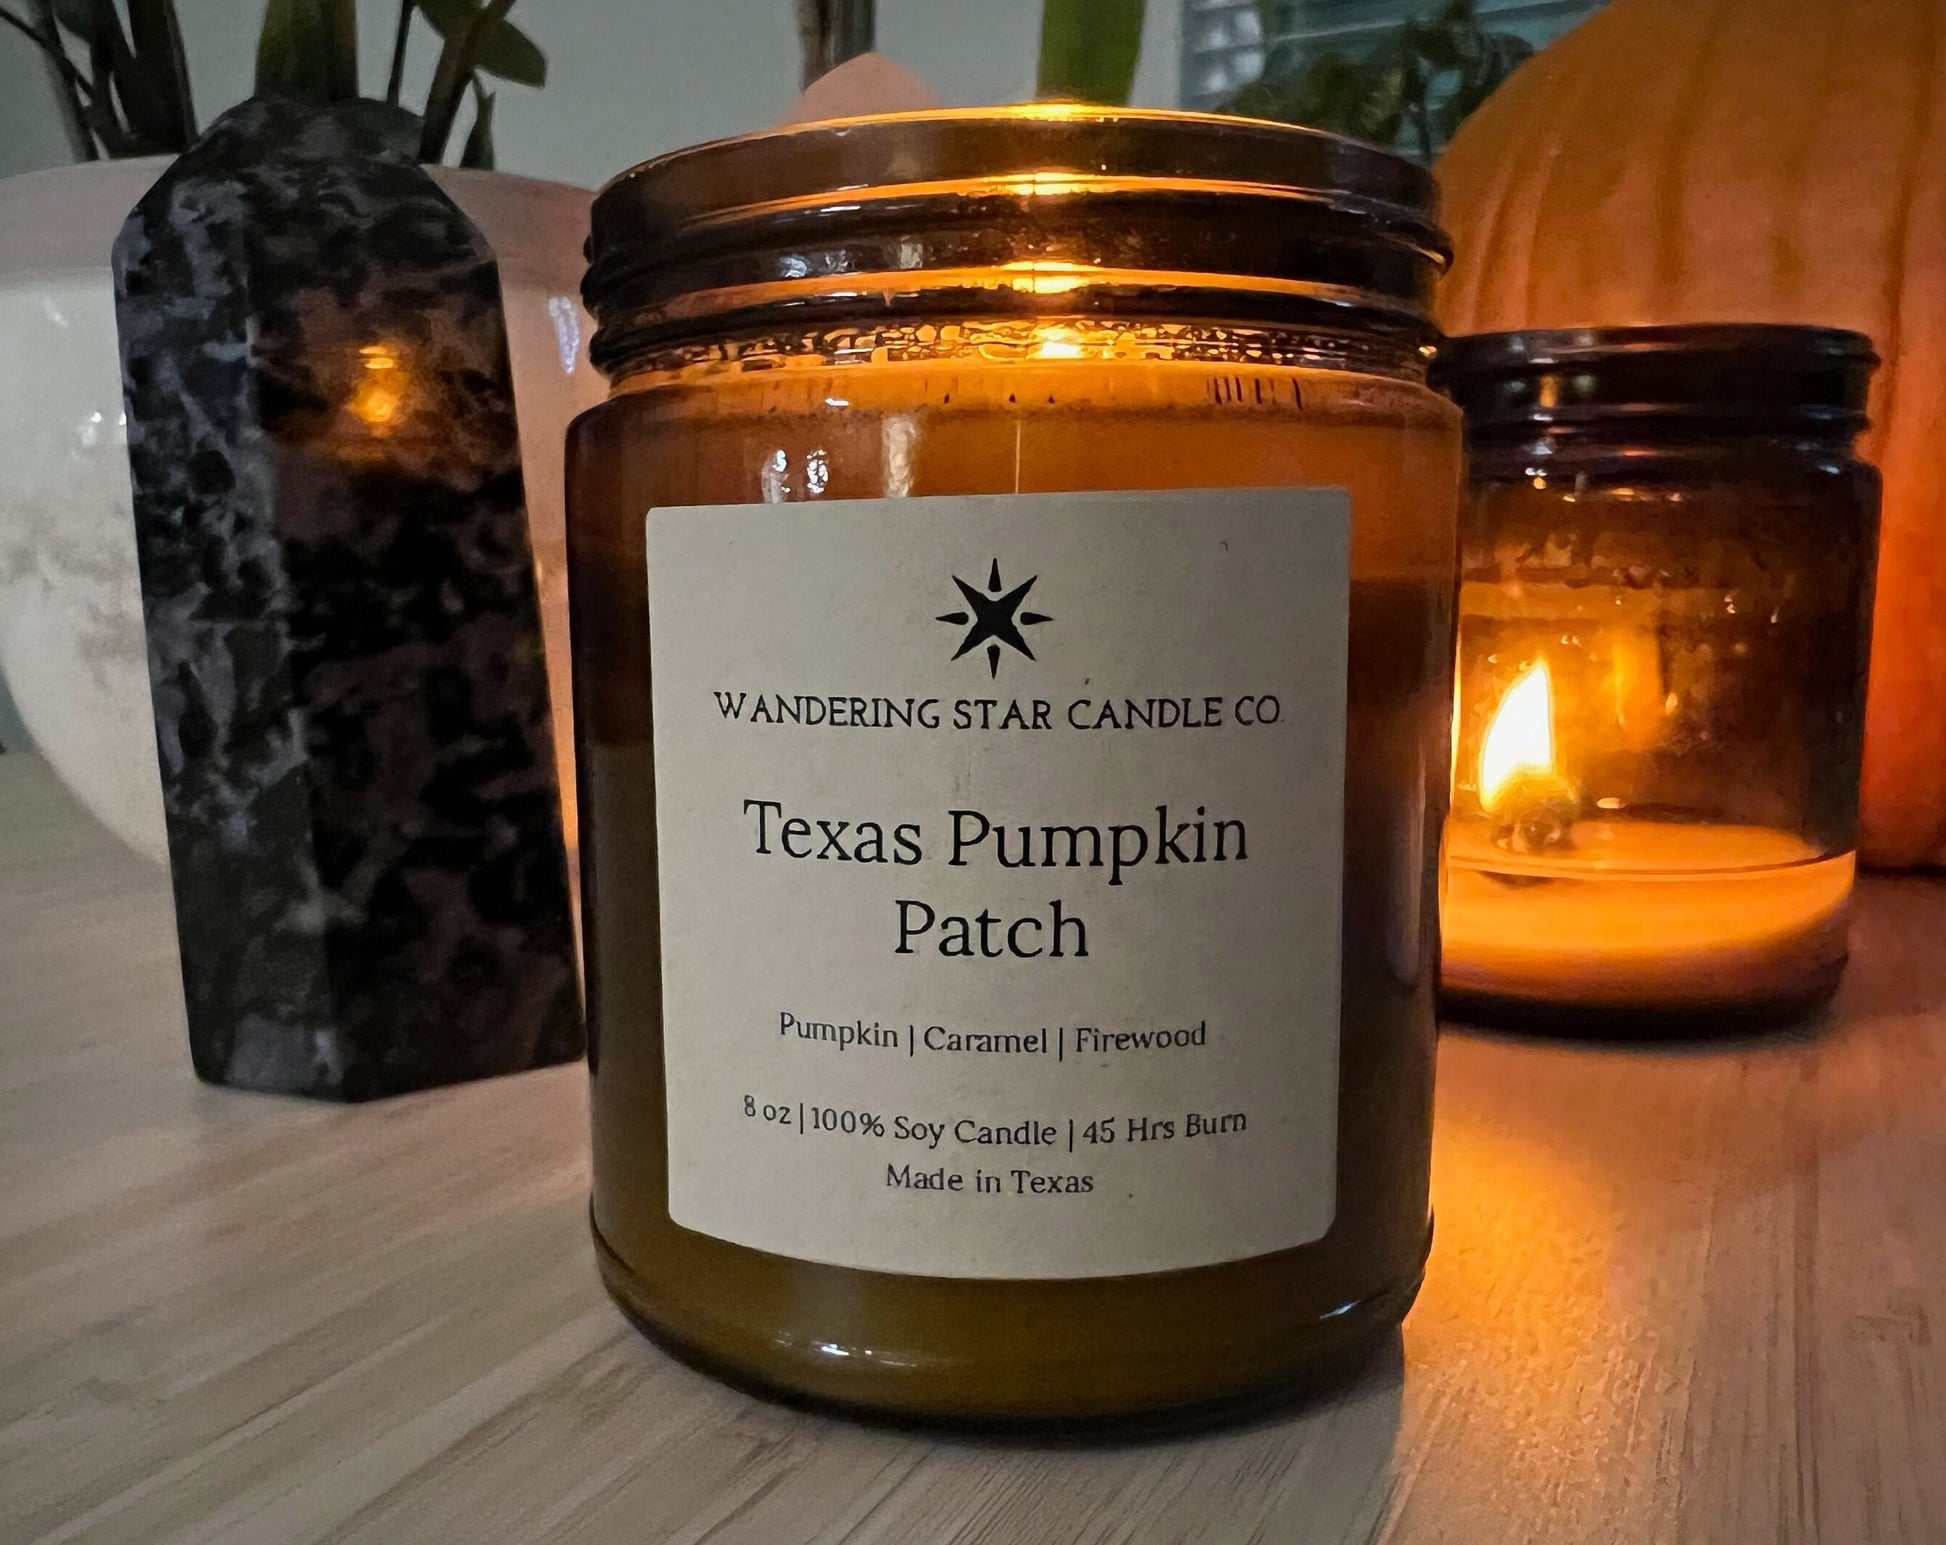 Texas Pumpkin Patch | Fall Candle | Pumpkin Candle | Amber Jar Candle | Pumpkin Spice Candle | Cozy Candle | Soy Candle | Holiday Candle